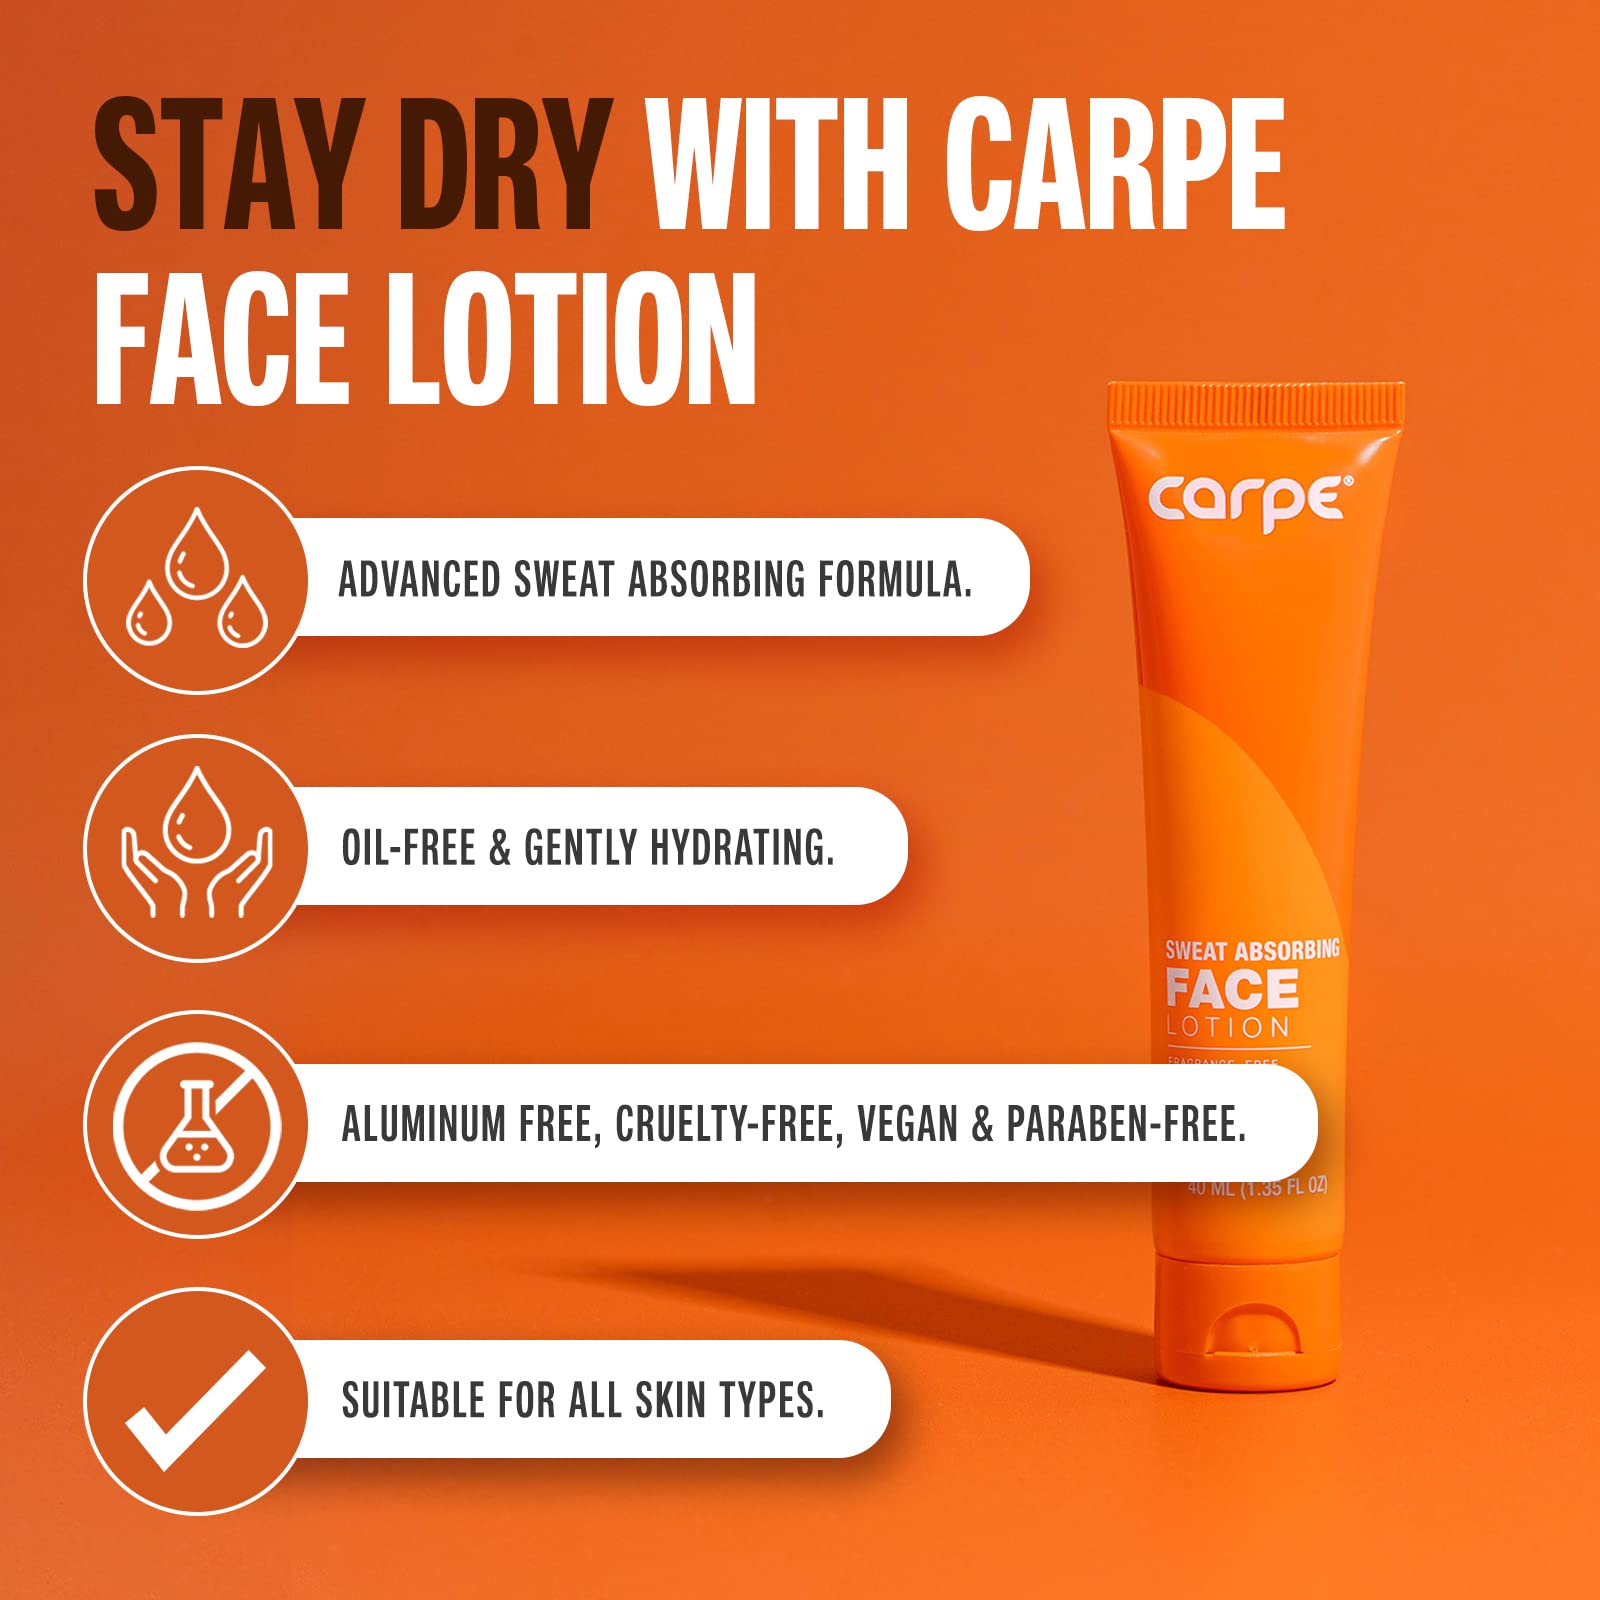 Carpe - Helps Keep Your Face, Forehead, and Scalp Dry - Sweat Absorbing Gelled Lotion - Plus Oily Face Control - With Silica Microspheres and Jojoba Esters